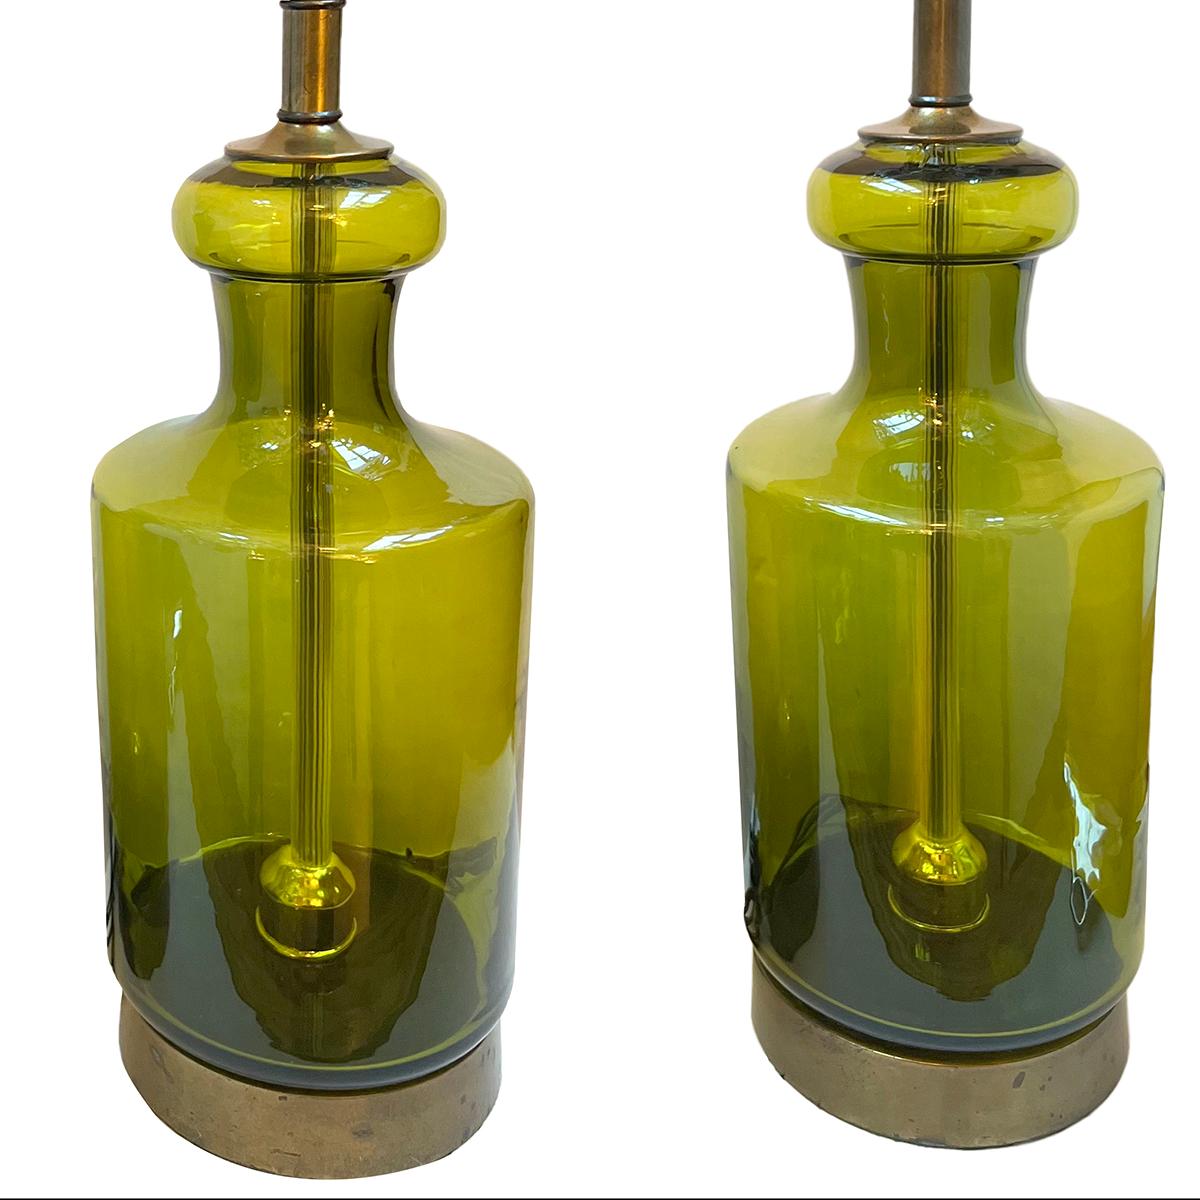 Pair of circa 1960's Italian blown glass lamps.

Measurements:
Height of body: 19.5